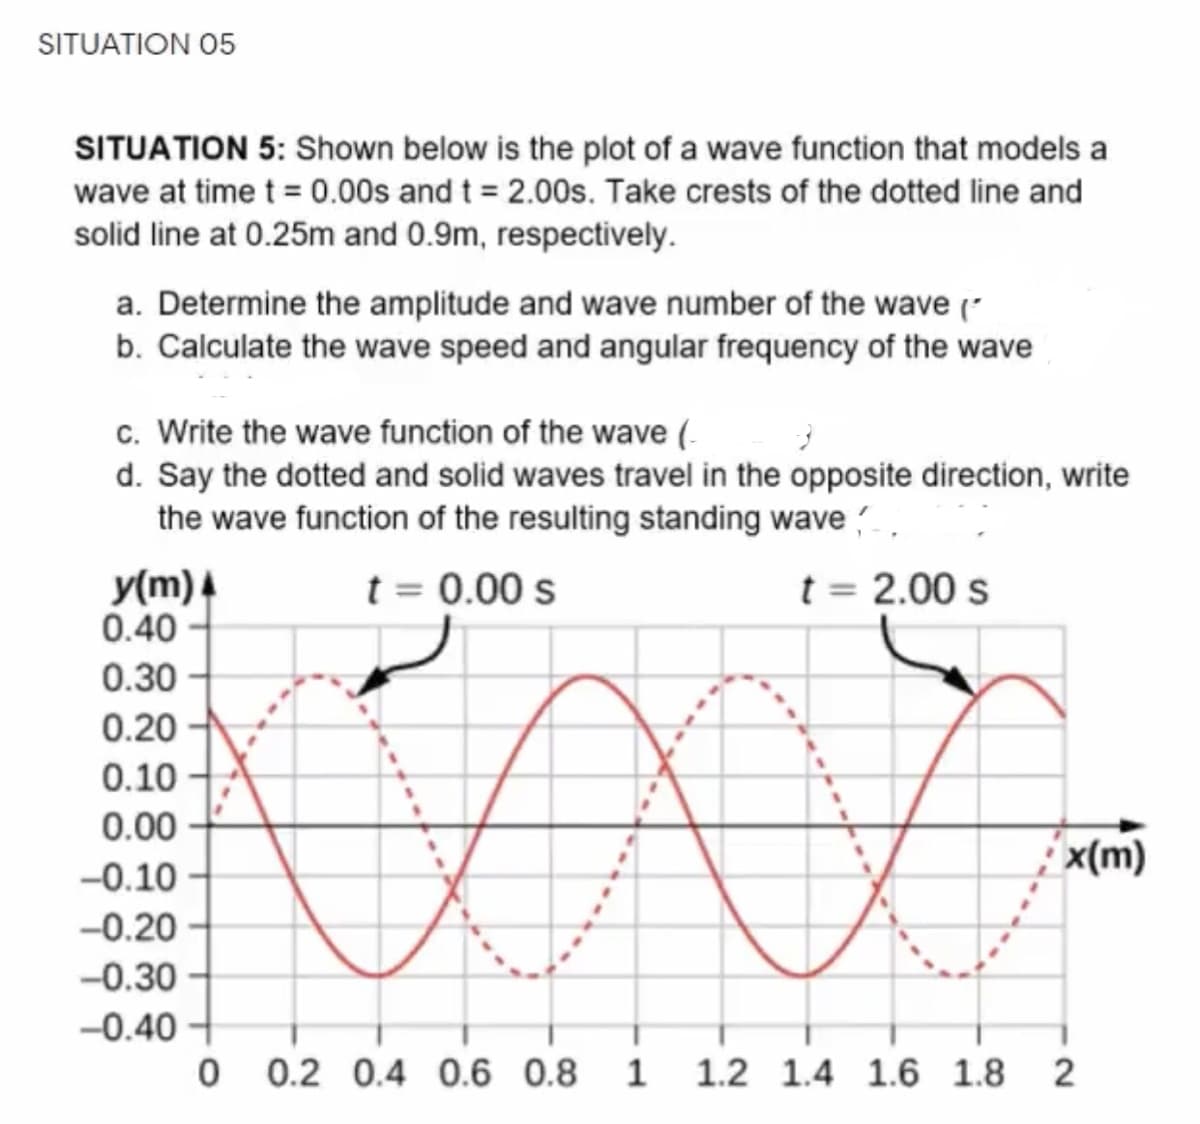 SITUATION 05
SITUATION 5: Shown below is the plot of a wave function that models a
wave at time t = 0.00s and t = 2.00s. Take crests of the dotted line and
solid line at 0.25m and 0.9m, respectively.
a. Determine the amplitude and wave number of the wave (-
b. Calculate the wave speed and angular frequency of the wave
c. Write the wave function of the wave (-
d. Say the dotted and solid waves travel in the opposite direction, write
the wave function of the resulting standing wave
y(m)
0.40
t = 0.00 s
t = 2.00 s
0.30
0.20
0.10
0.00
x(m)
-0.10
-0.20
-0.30
-0.40
0.2 0.4 0.6 0.8
1
1.2 1.4 1.6 1.8
2
